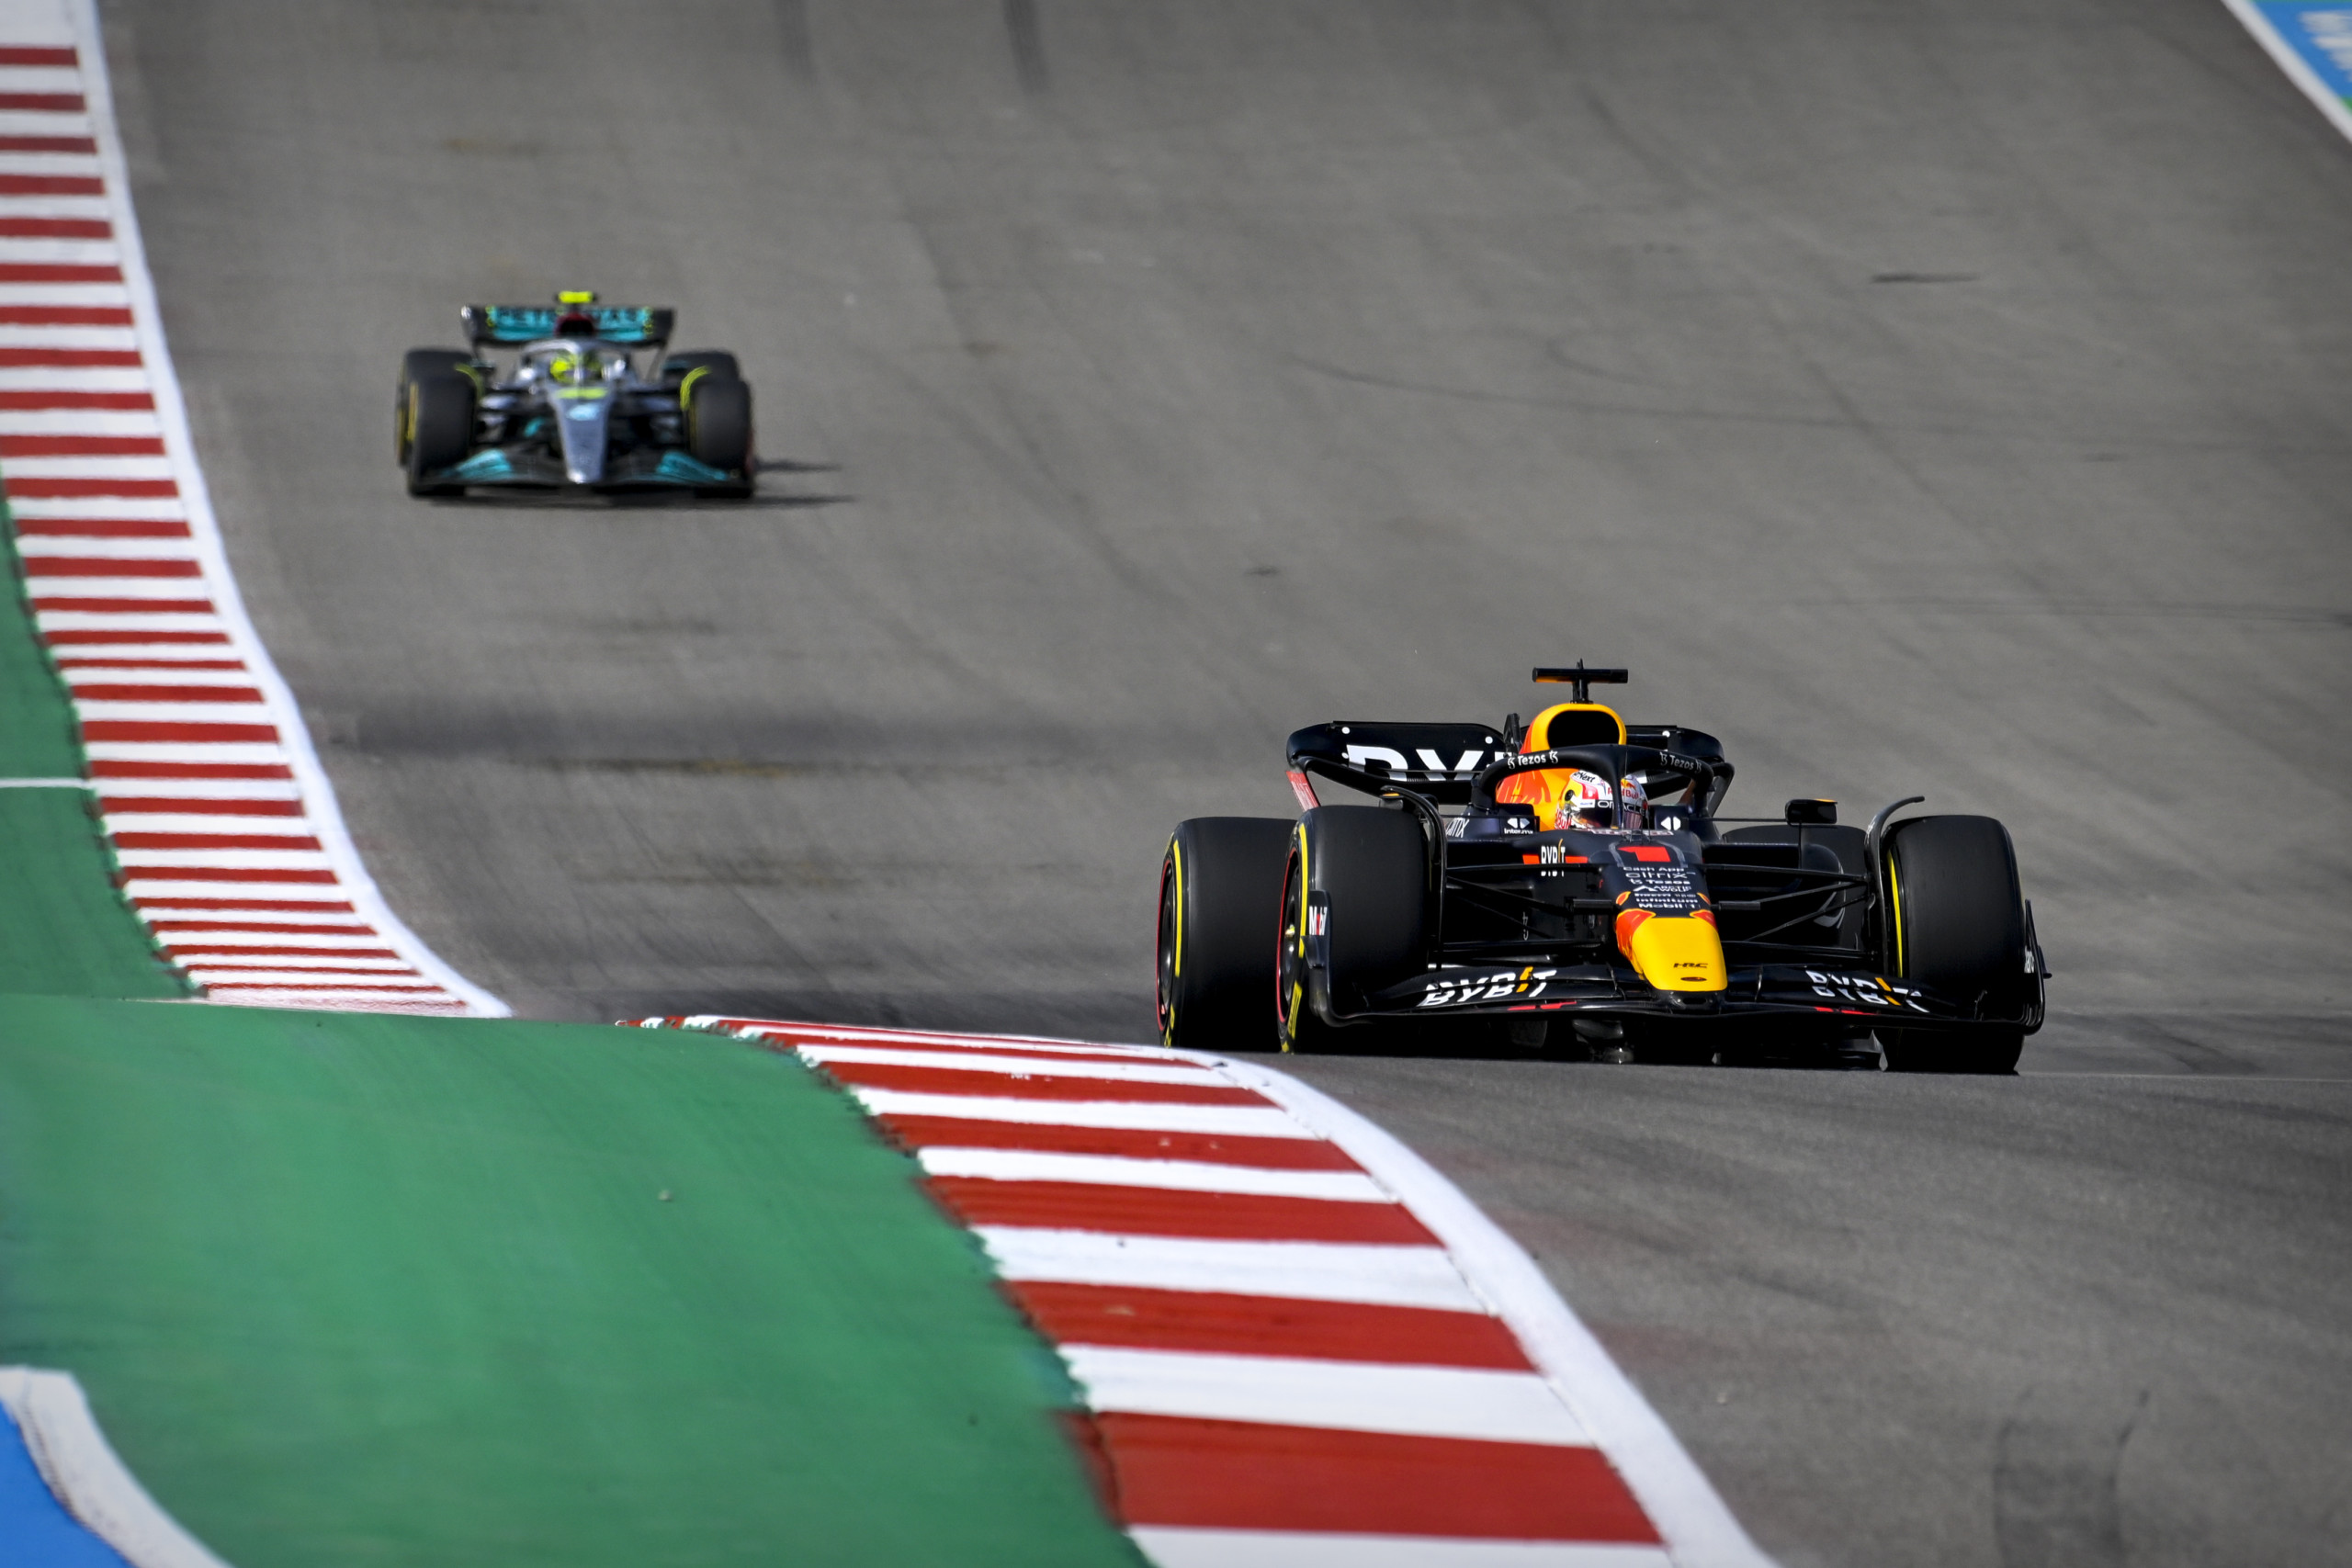 Red Bull Racing driver separates from Aston Martin competitor during Formula 1 race